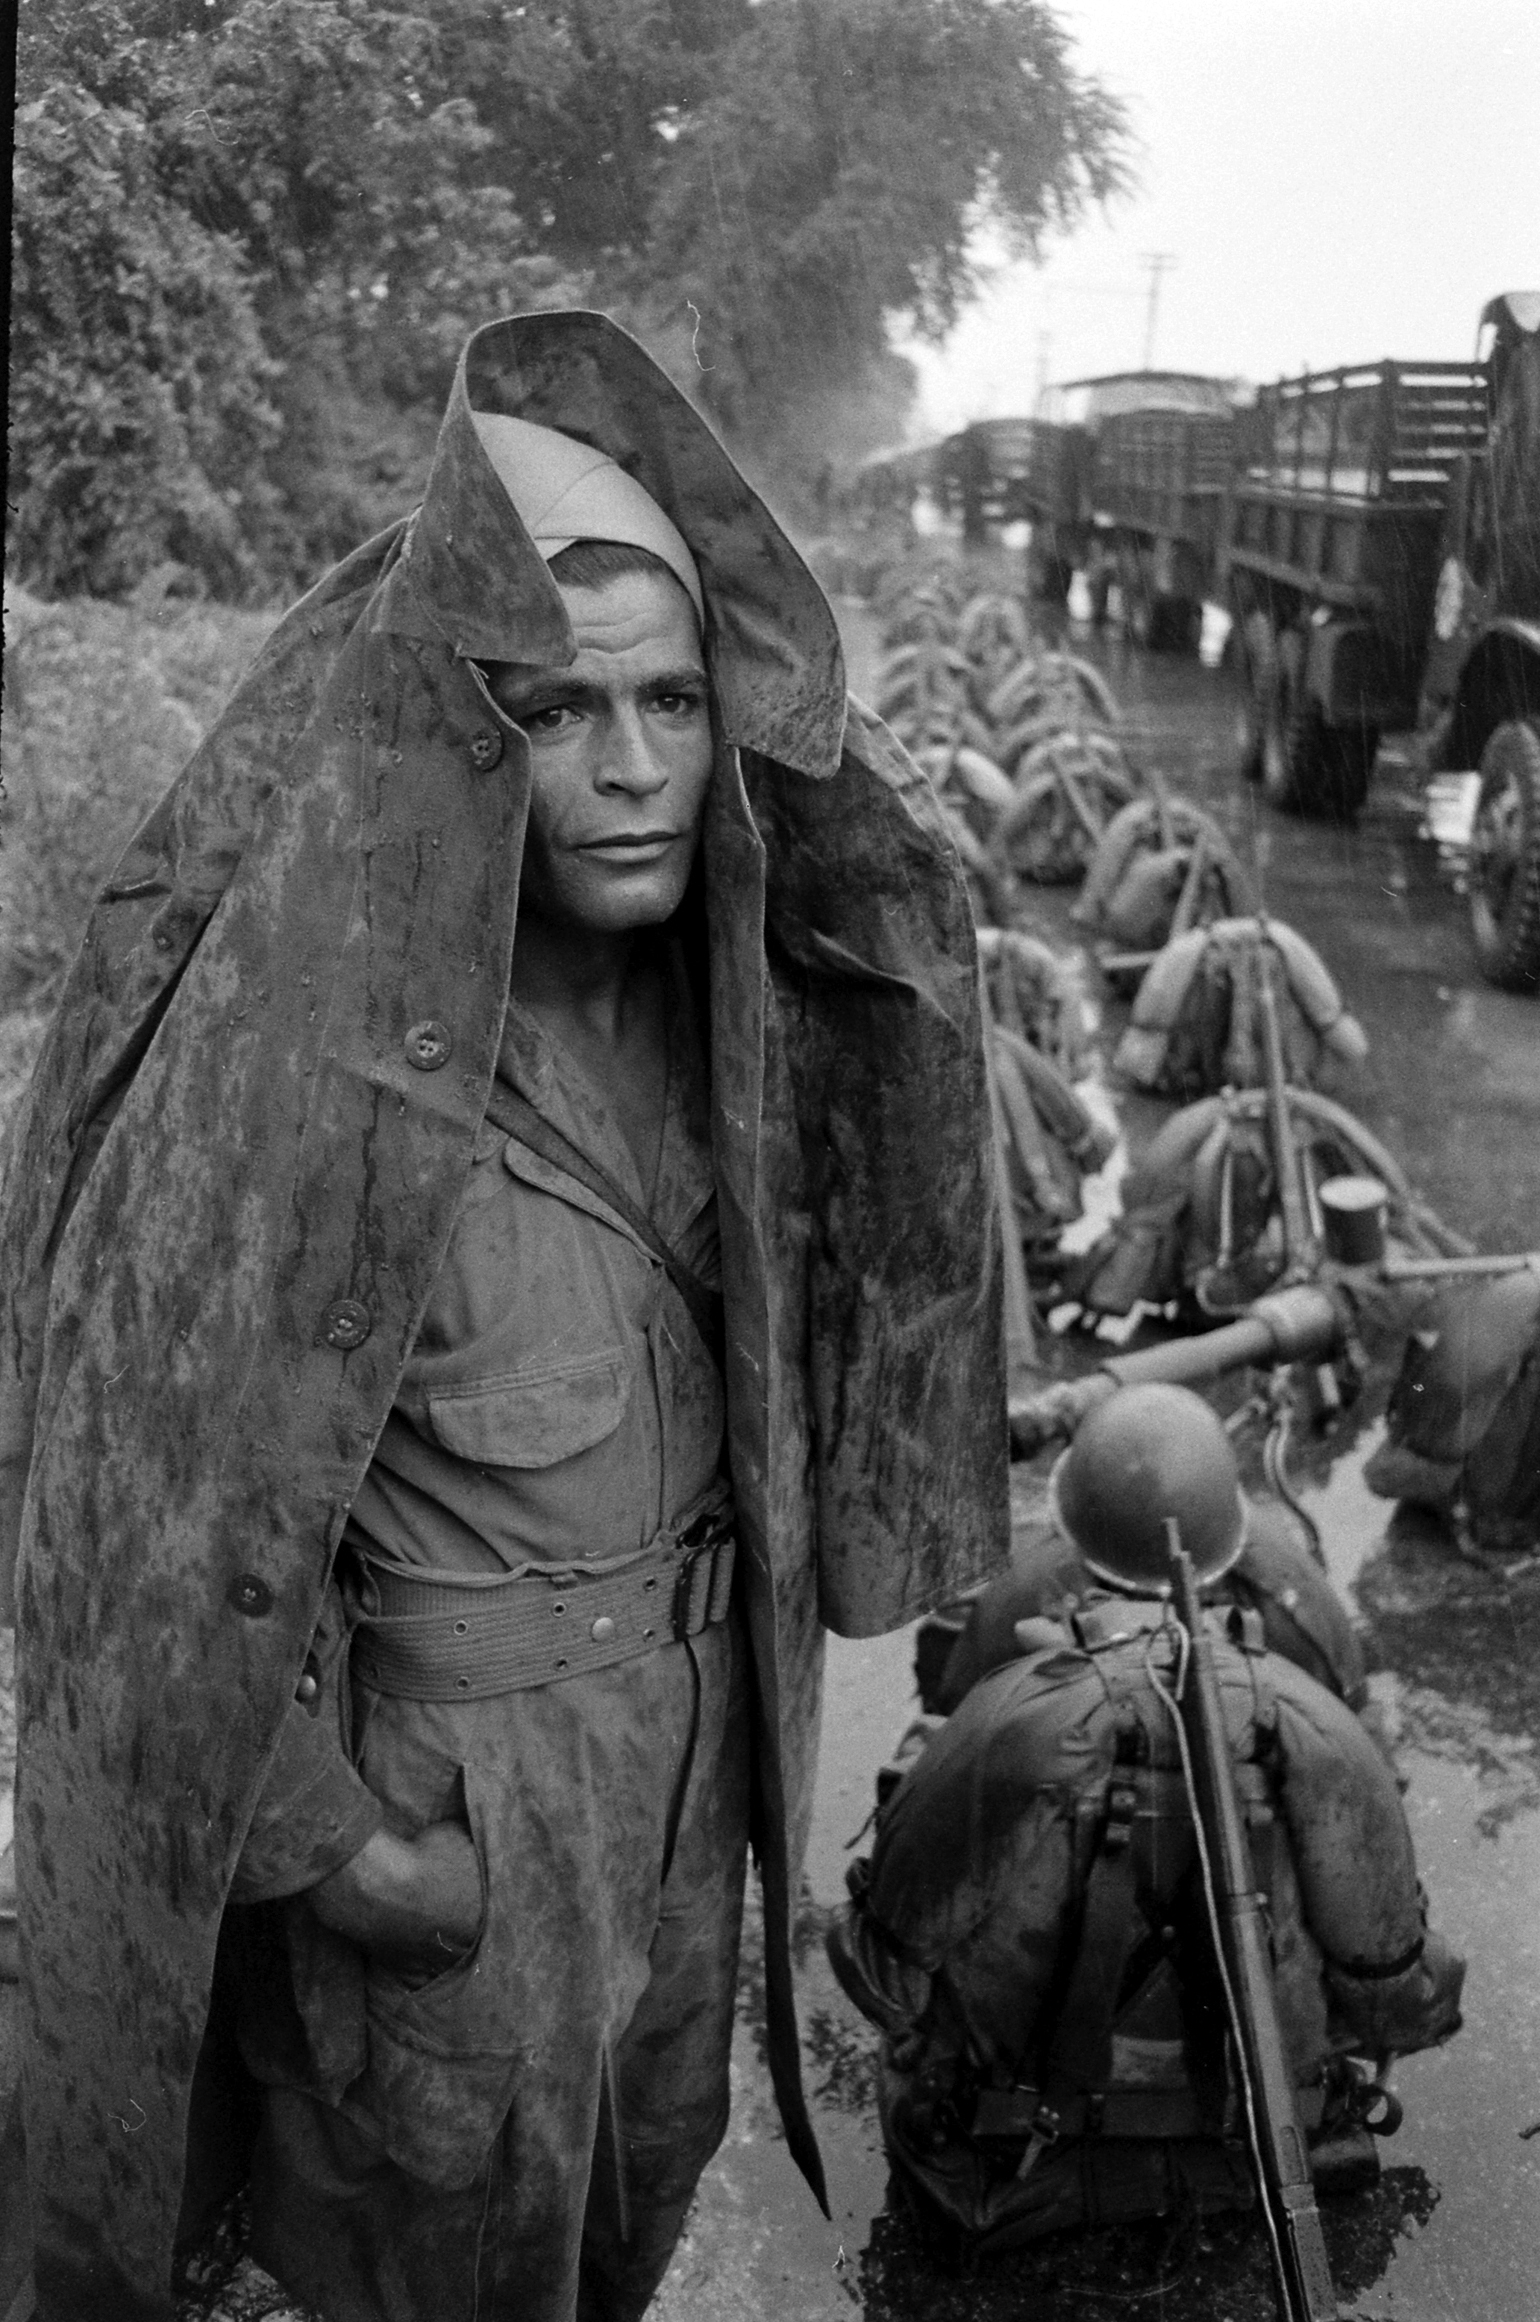 A soldier stands beside a line of packs in the rain, Hanoi, Vietnam, October 1954.